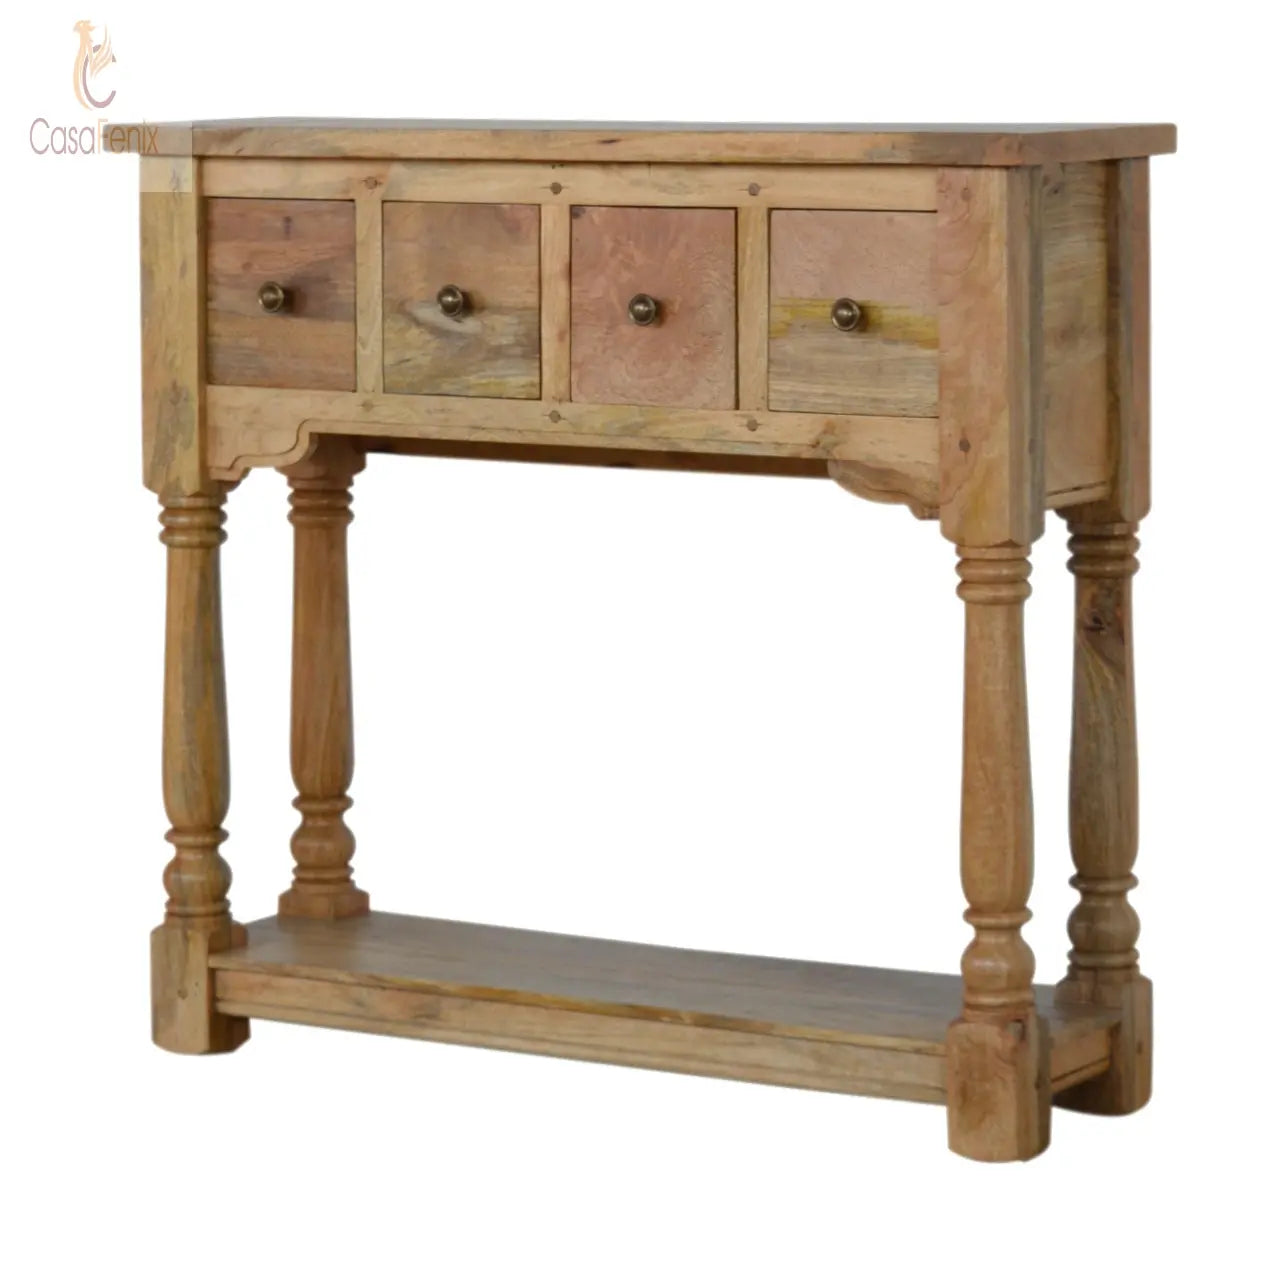 Granary Royale 4 Drawer Console Table 100% solid mango wood - CasaFenix